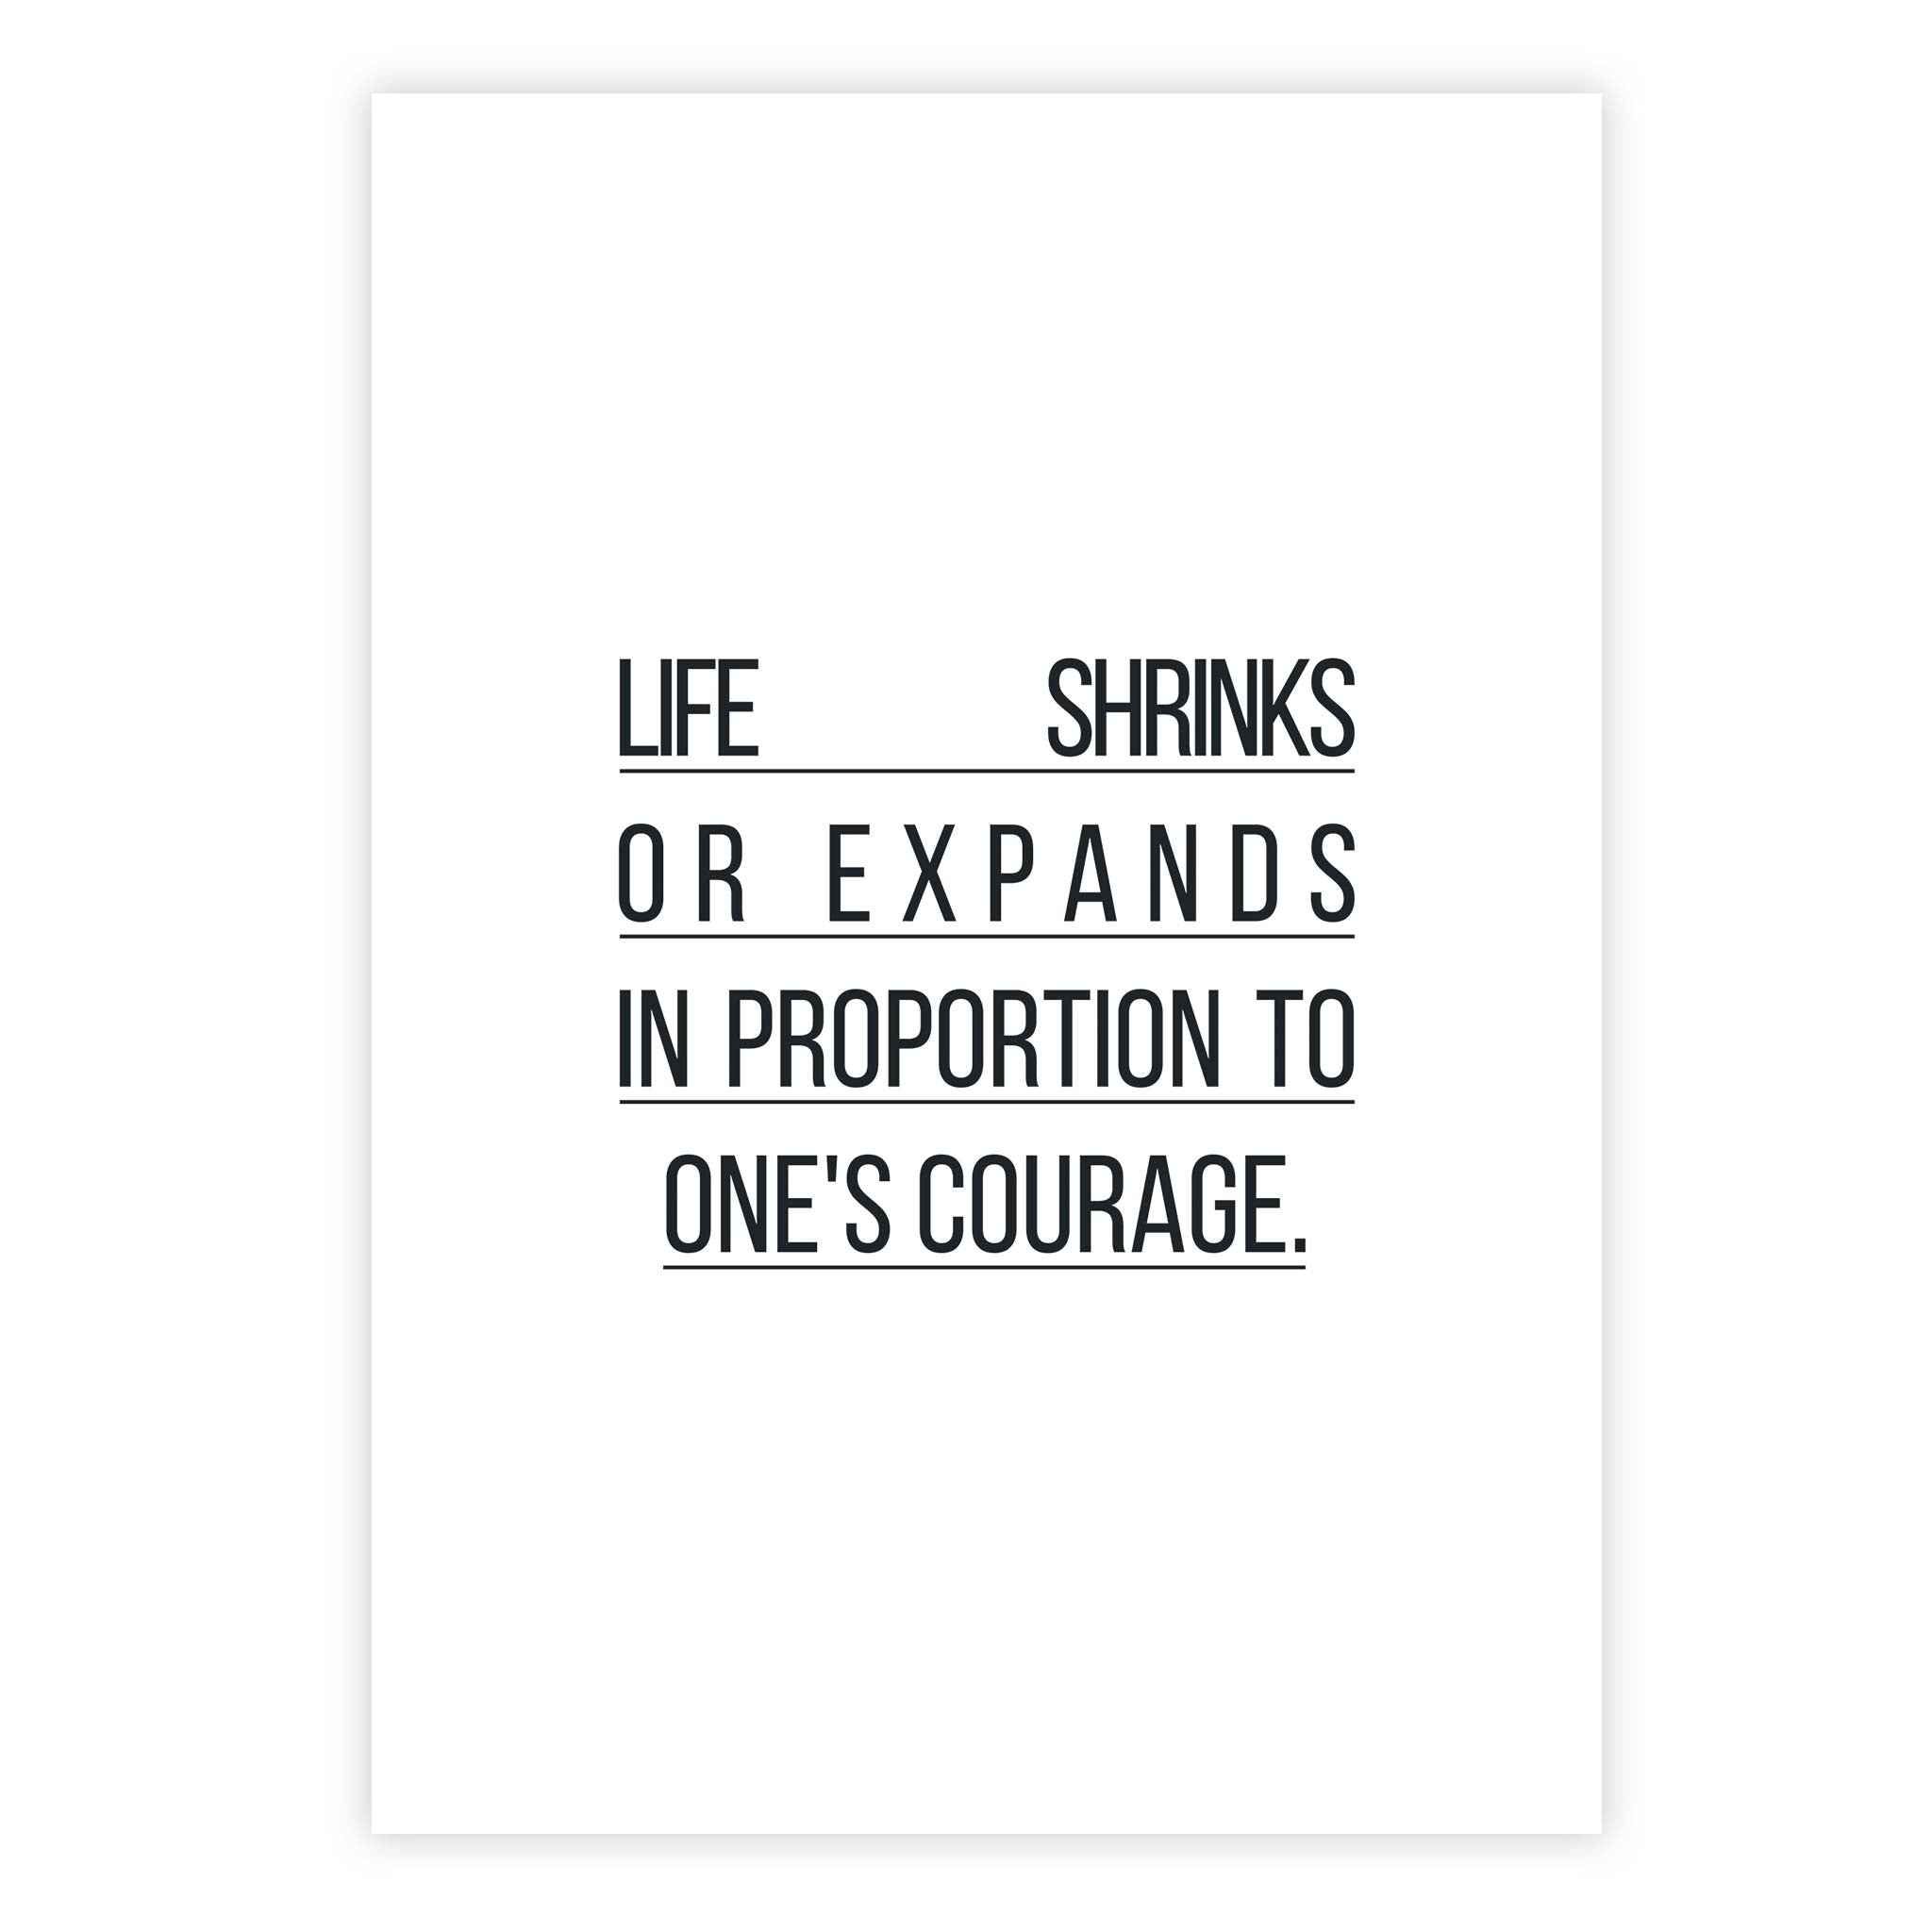 Life shrinks or expands in proportion to one's courage